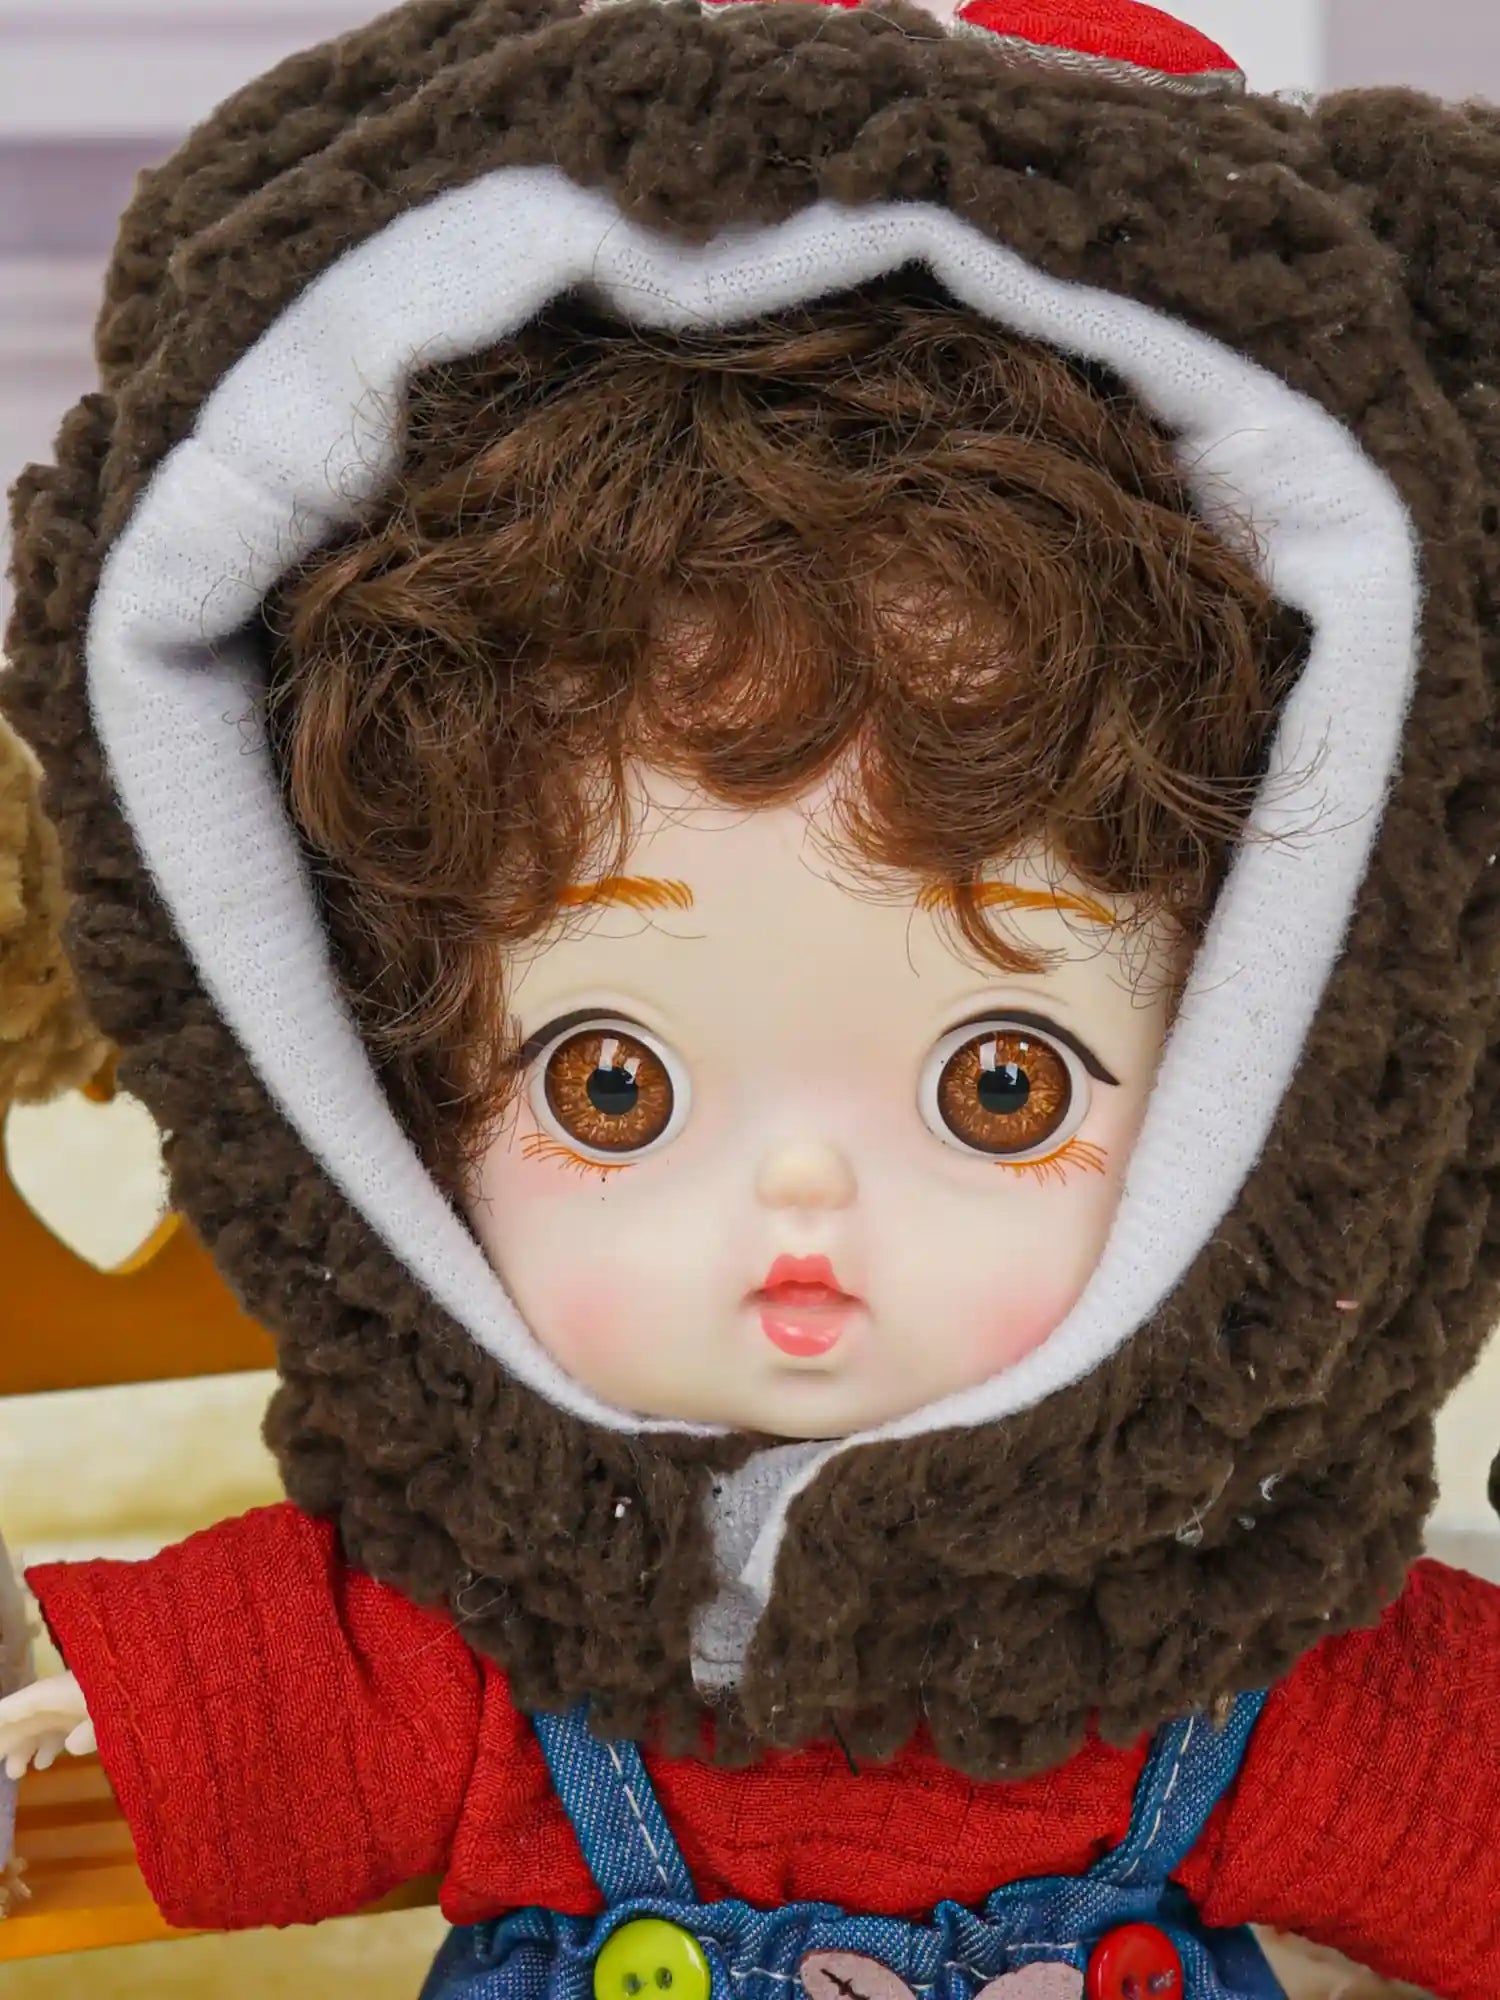 A brown-haired doll in a soft bear hood, with a petite Eiffel Tower model and a porcelain puppy by its side.